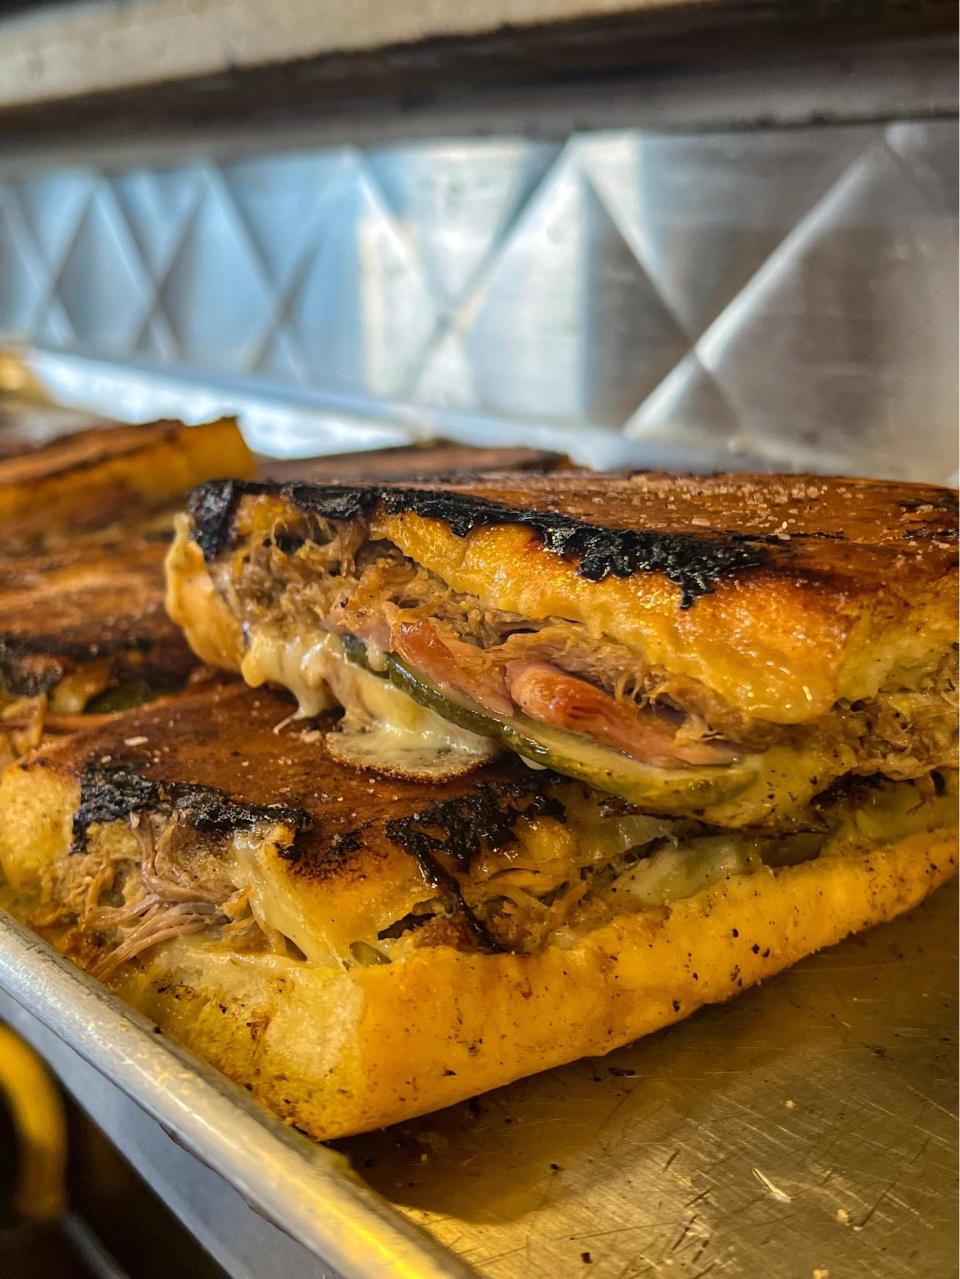 The Cuban sandwich will be one of the menu items offered at The Truck Stop restaurant in downtown Pensacola.